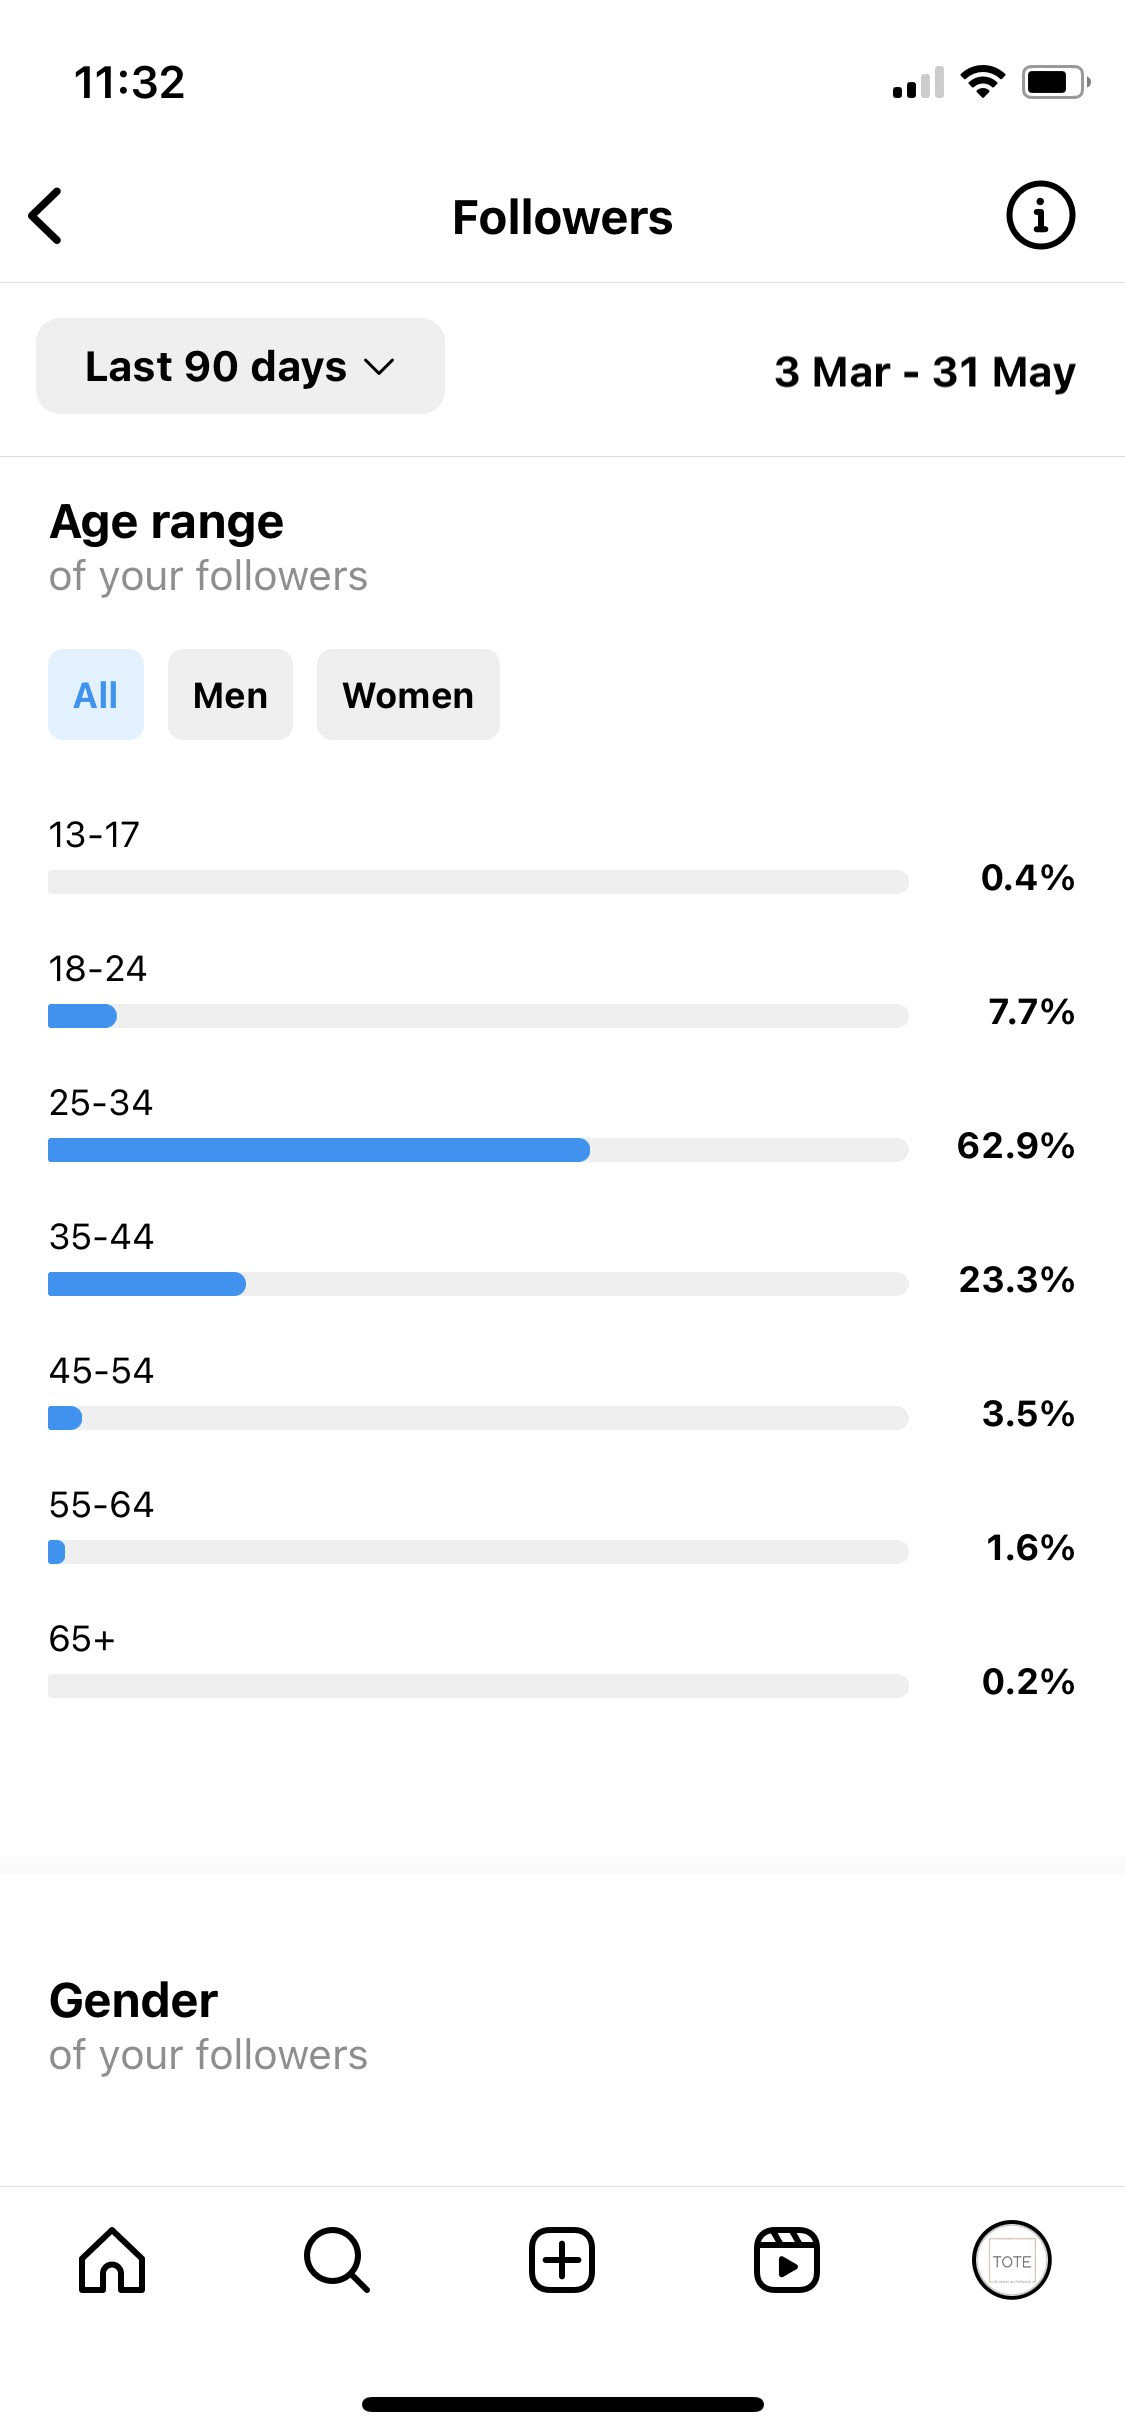 Followers' age and gender in Instagram Insights